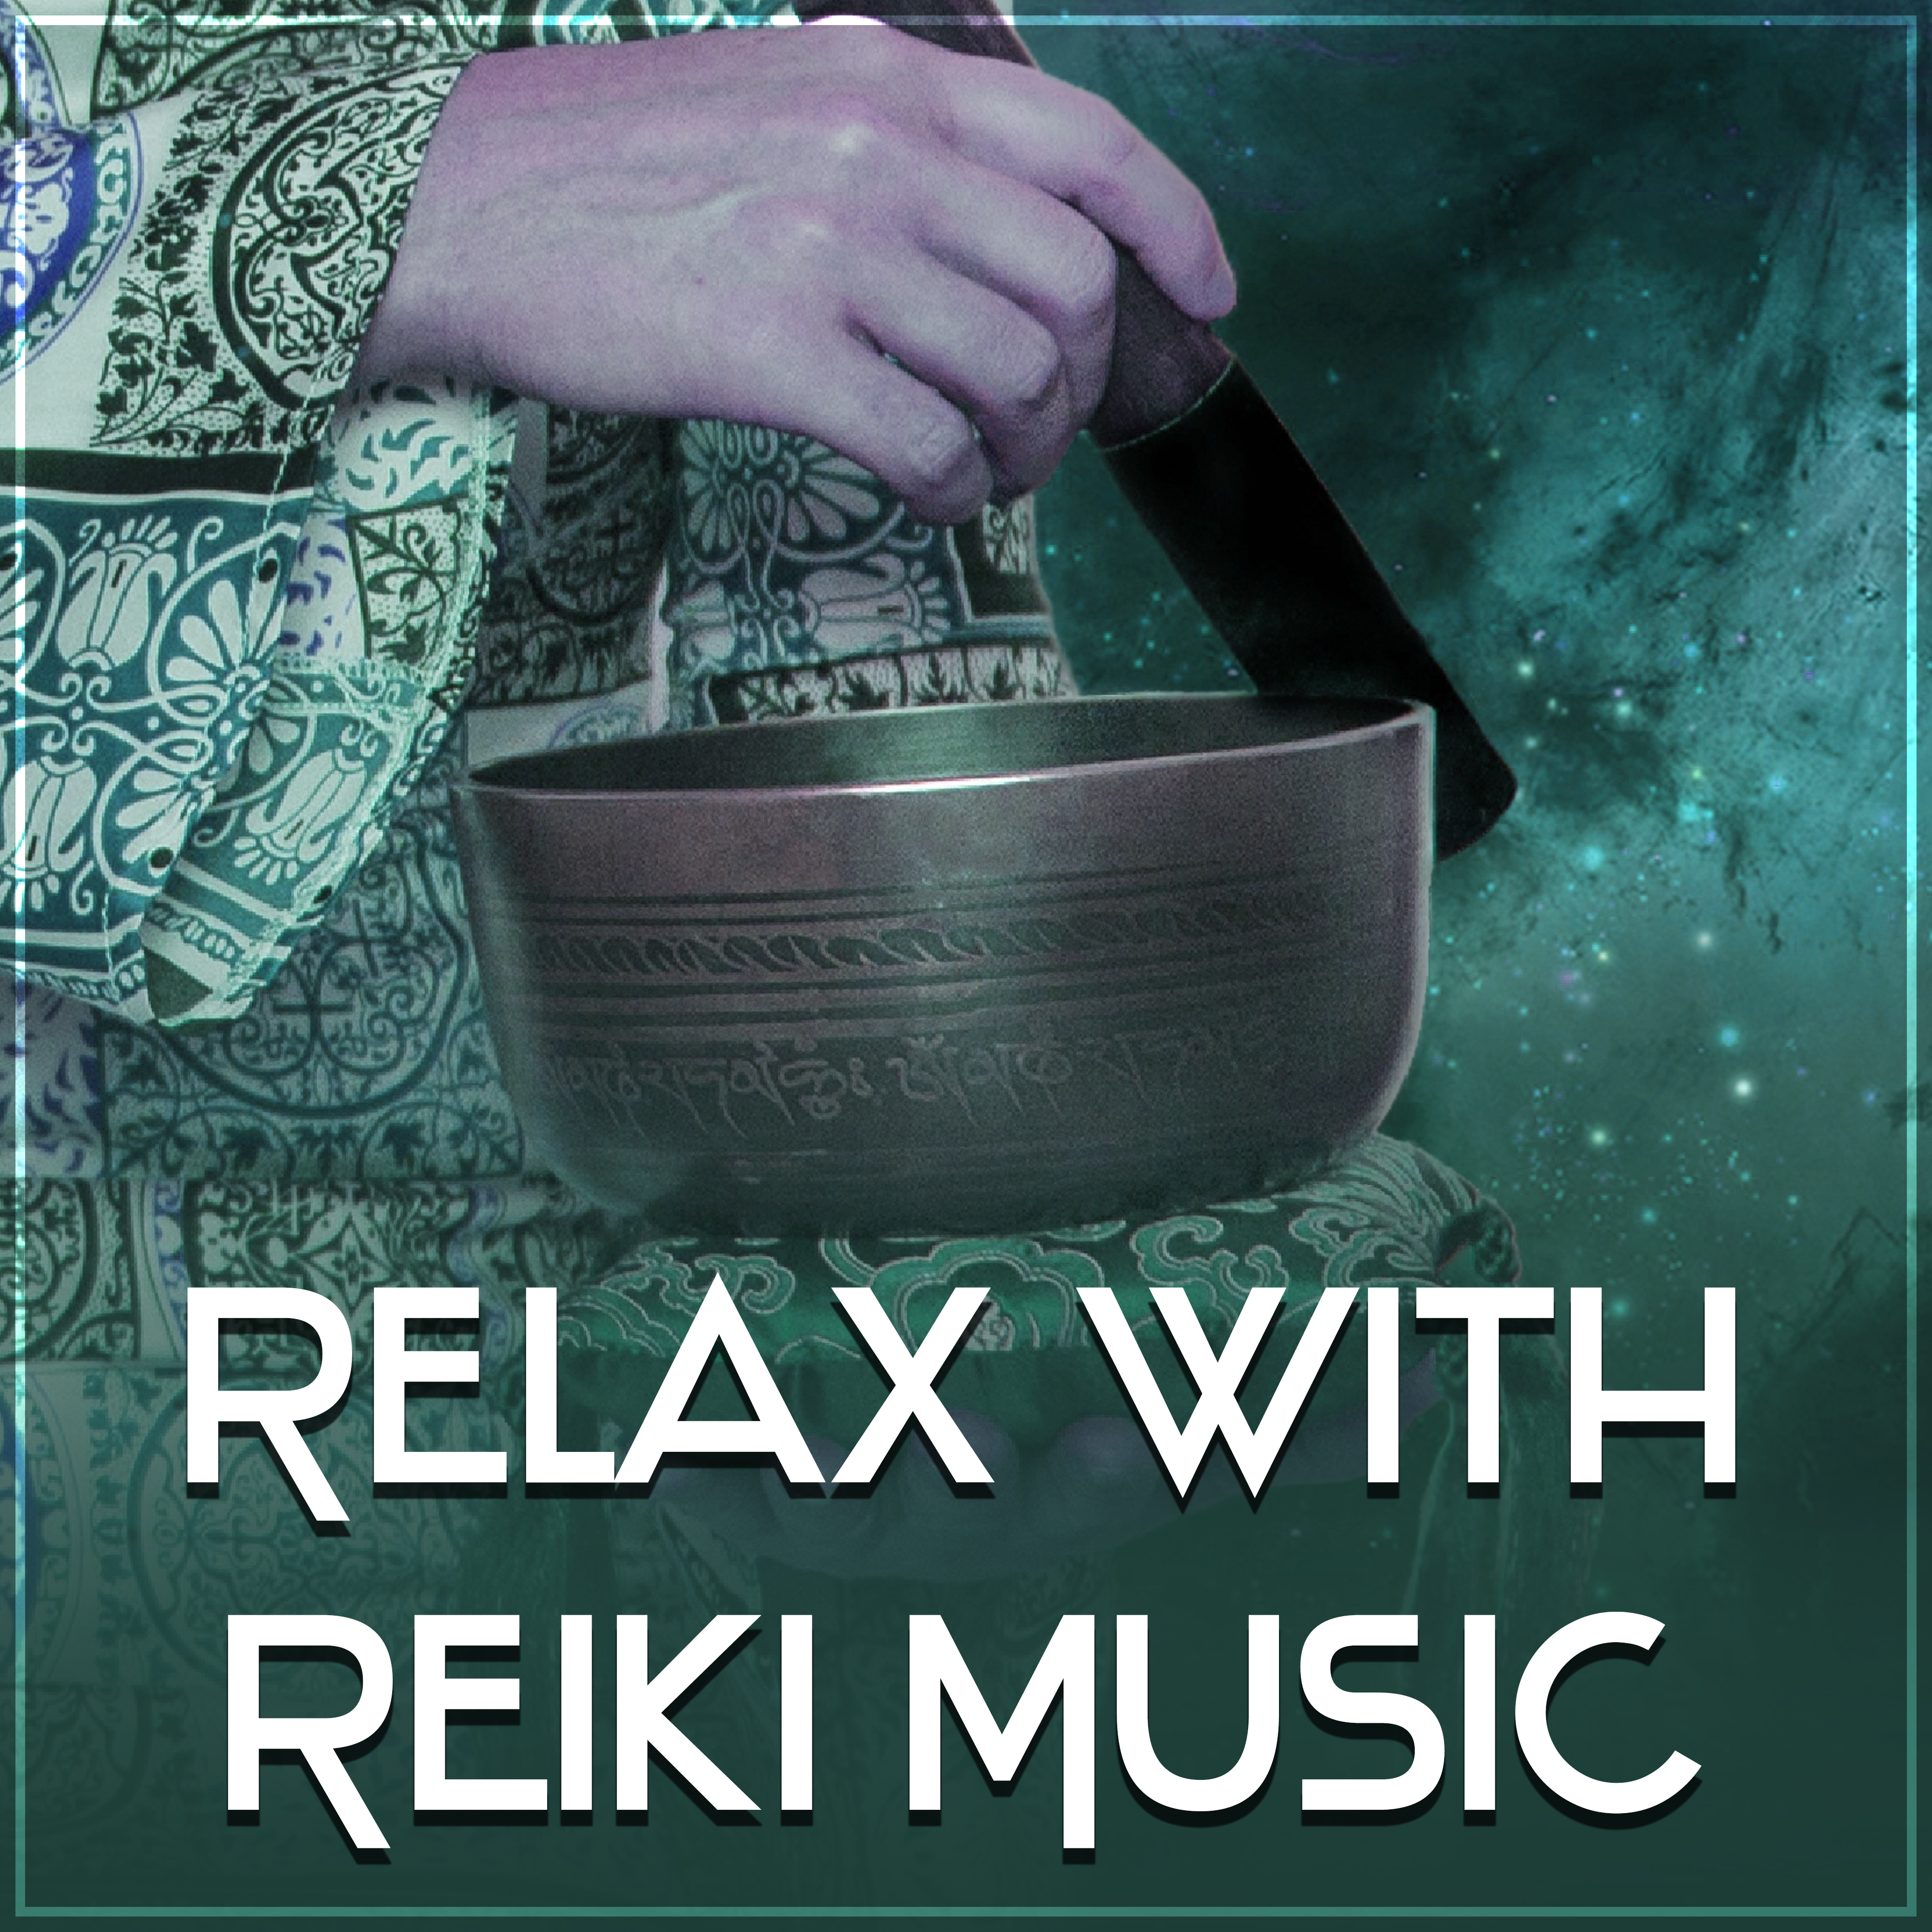 Relax with Reiki Music – Peaceful Music, Healing Sounds, Deep Sleep, Relaxing Therapy, Zen, Pure Waves, Nature Sounds